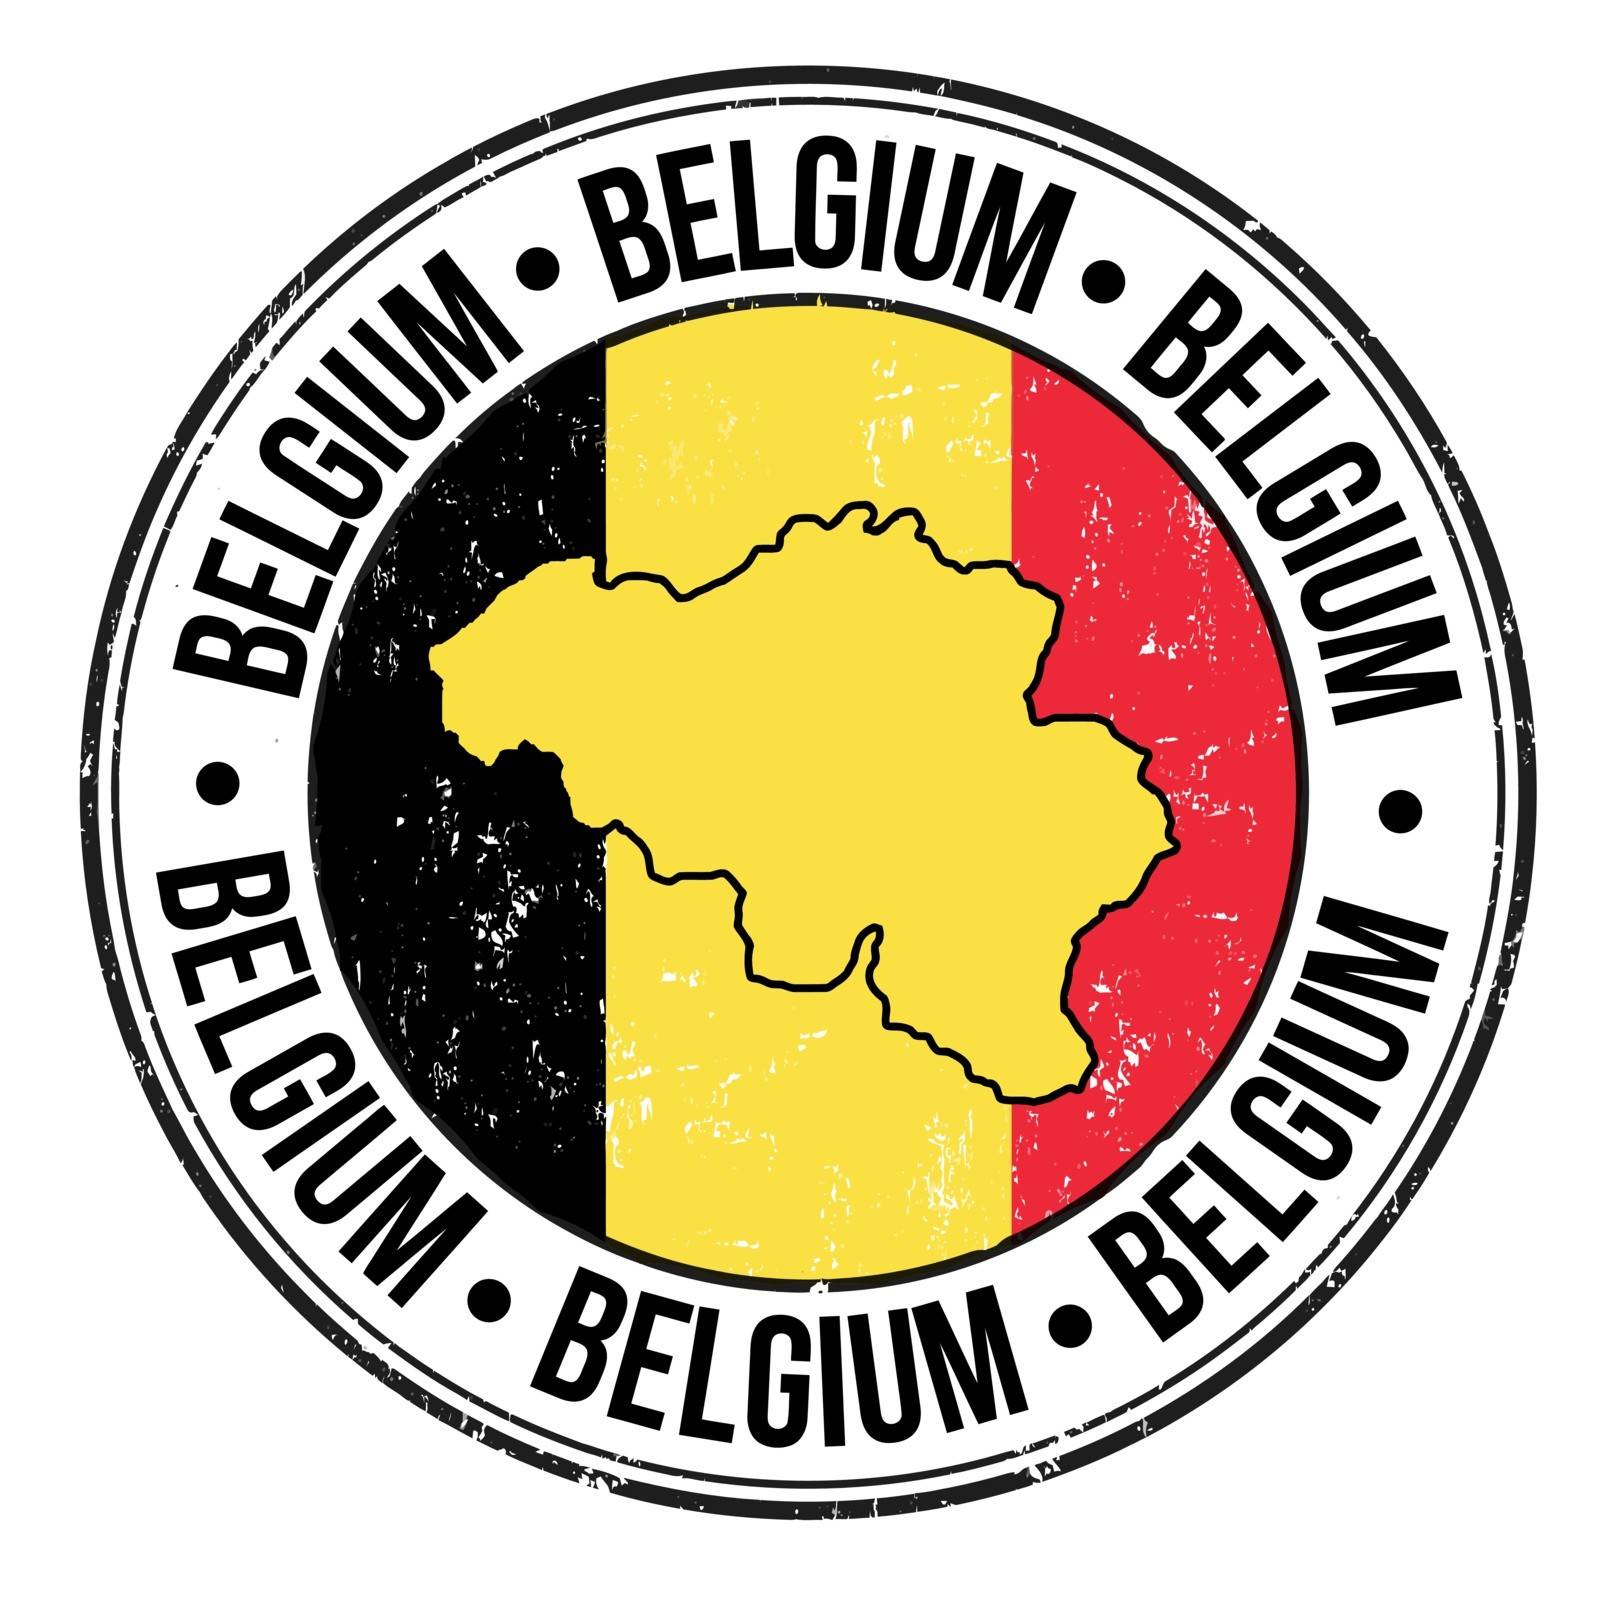 Grunge rubber stamp with Belgium flag, map and the word Belgium written inside, vector illustration